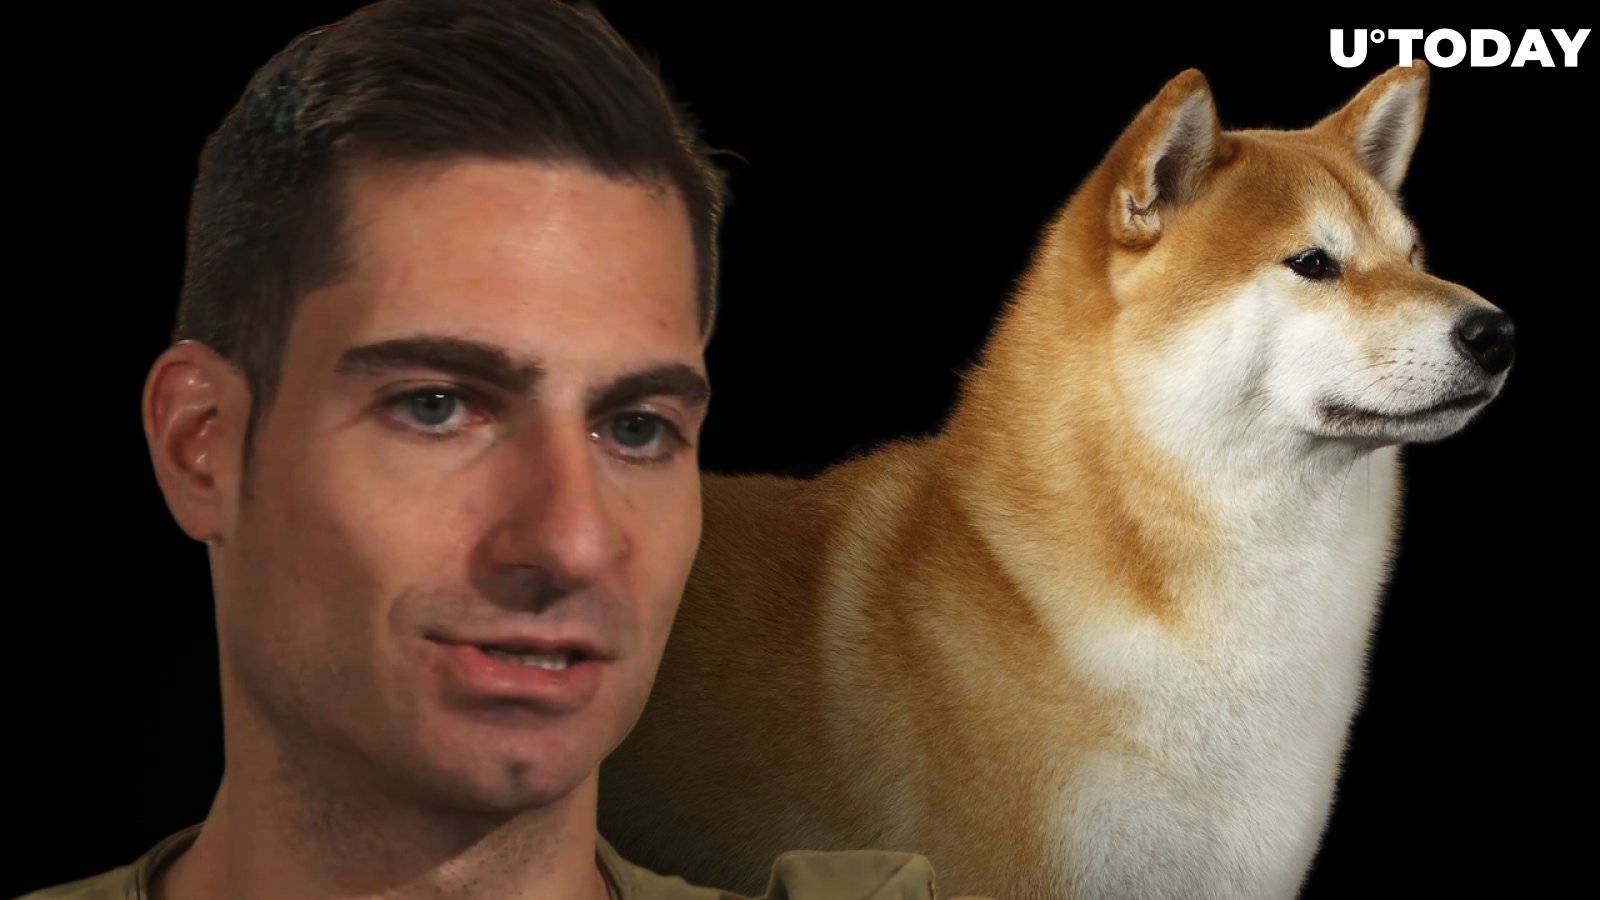 Shiba Inu Is the Pets.com of Crypto, Says Bedrock Founder Geoff Lewis